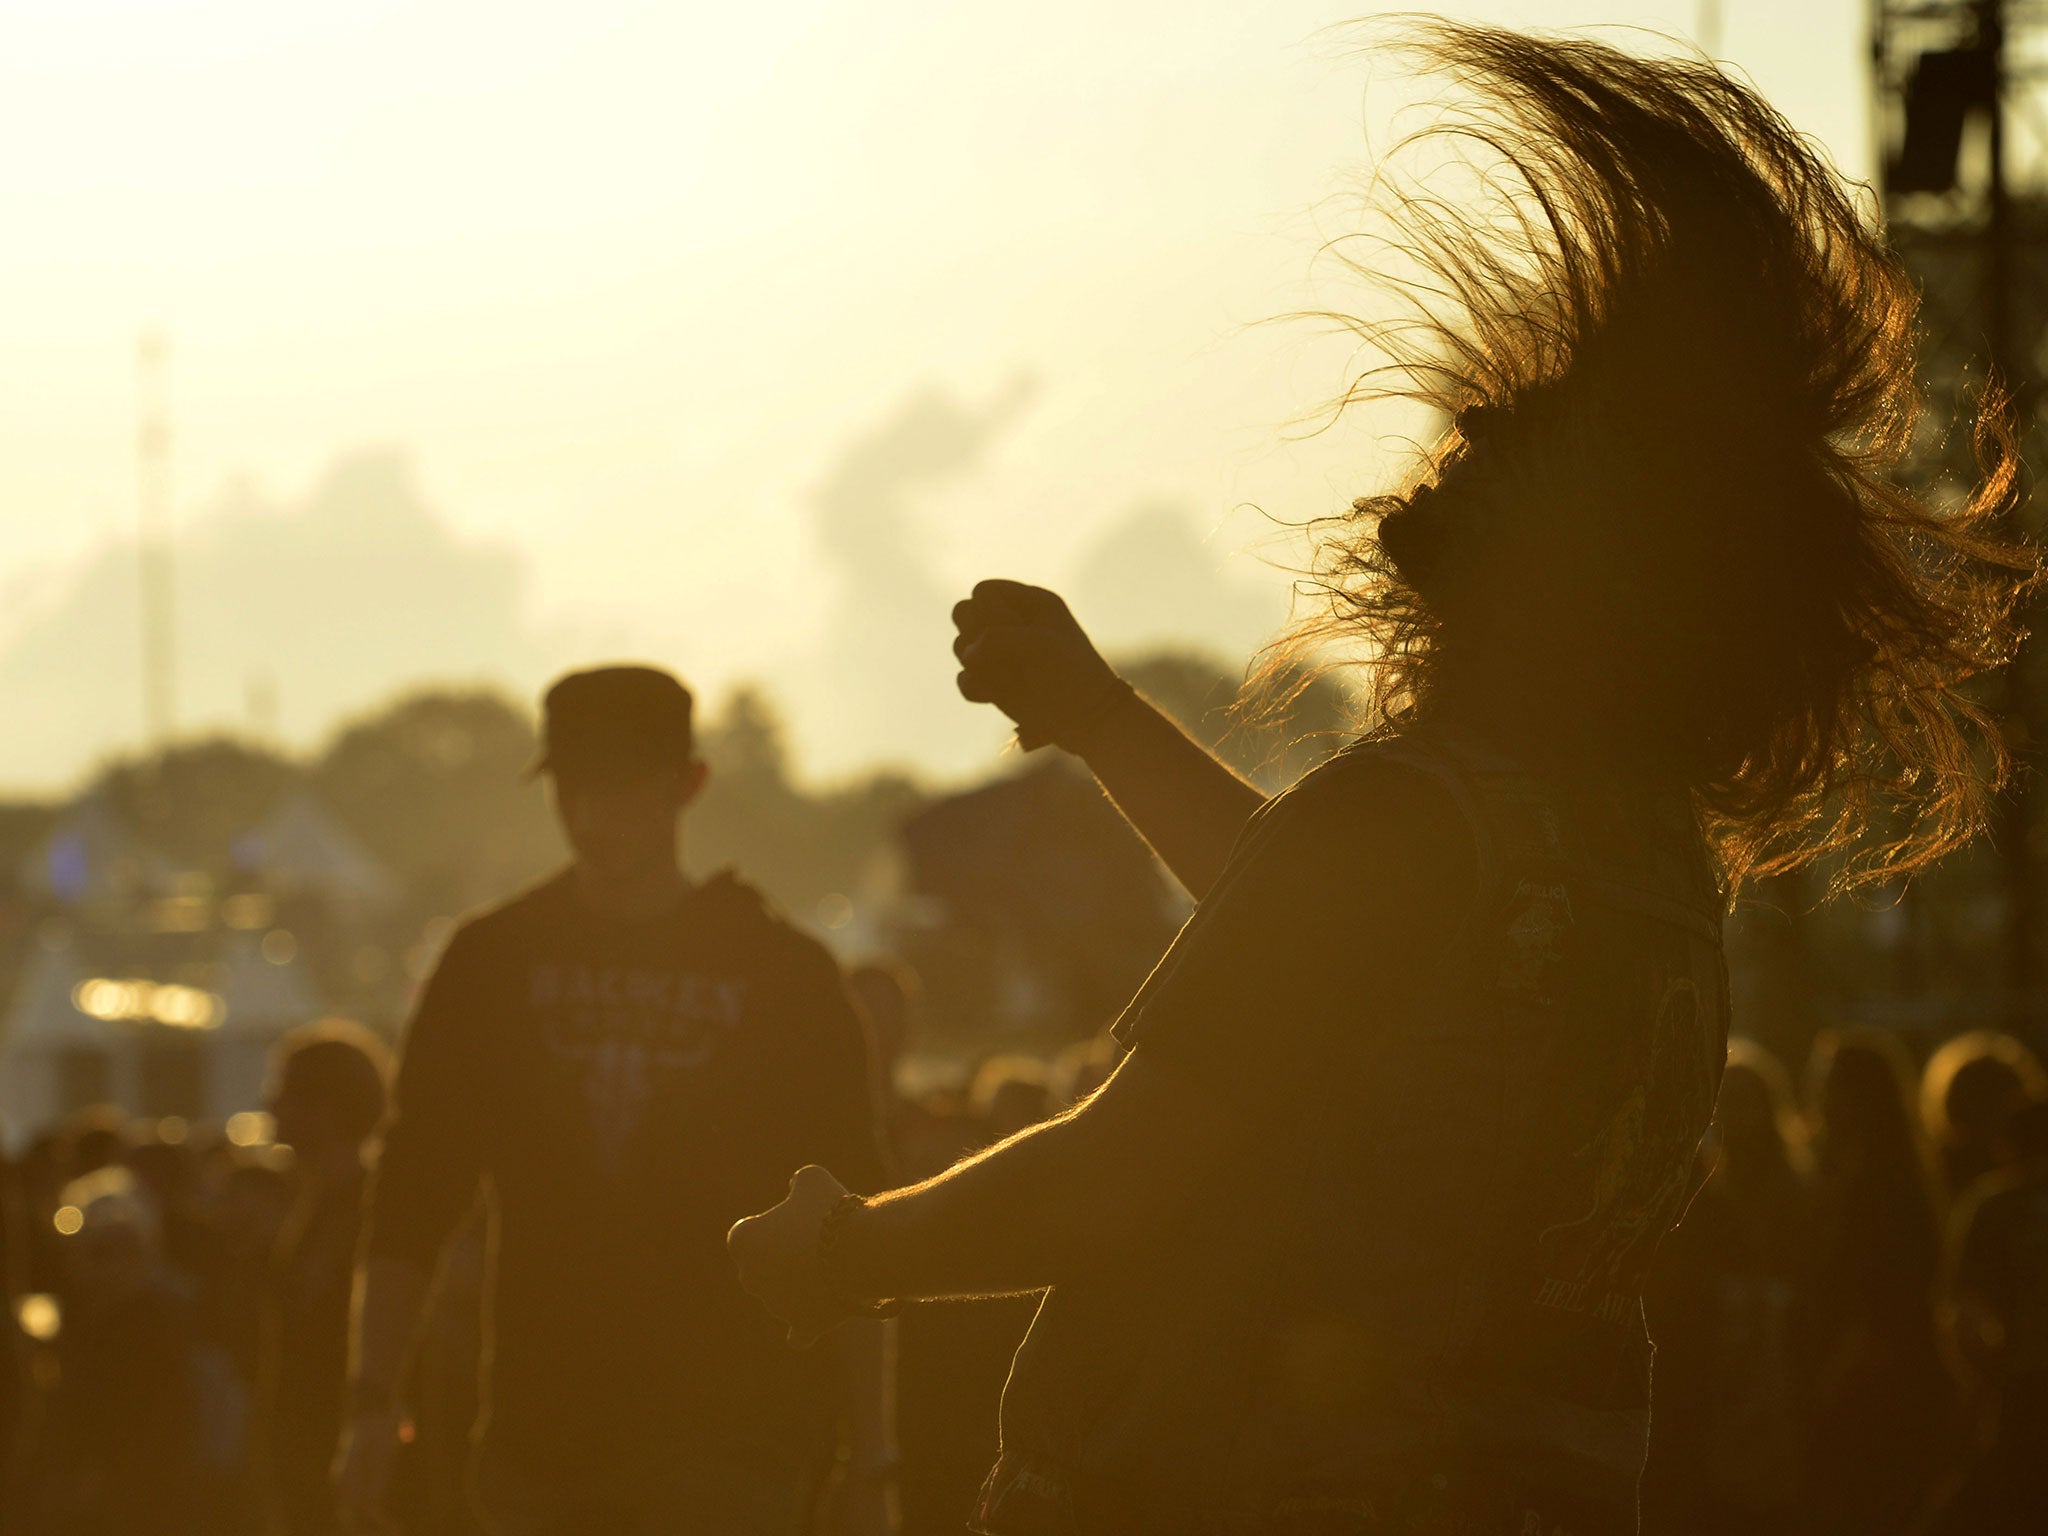 Headbanging could cause potentially fatal bleeding in the brain